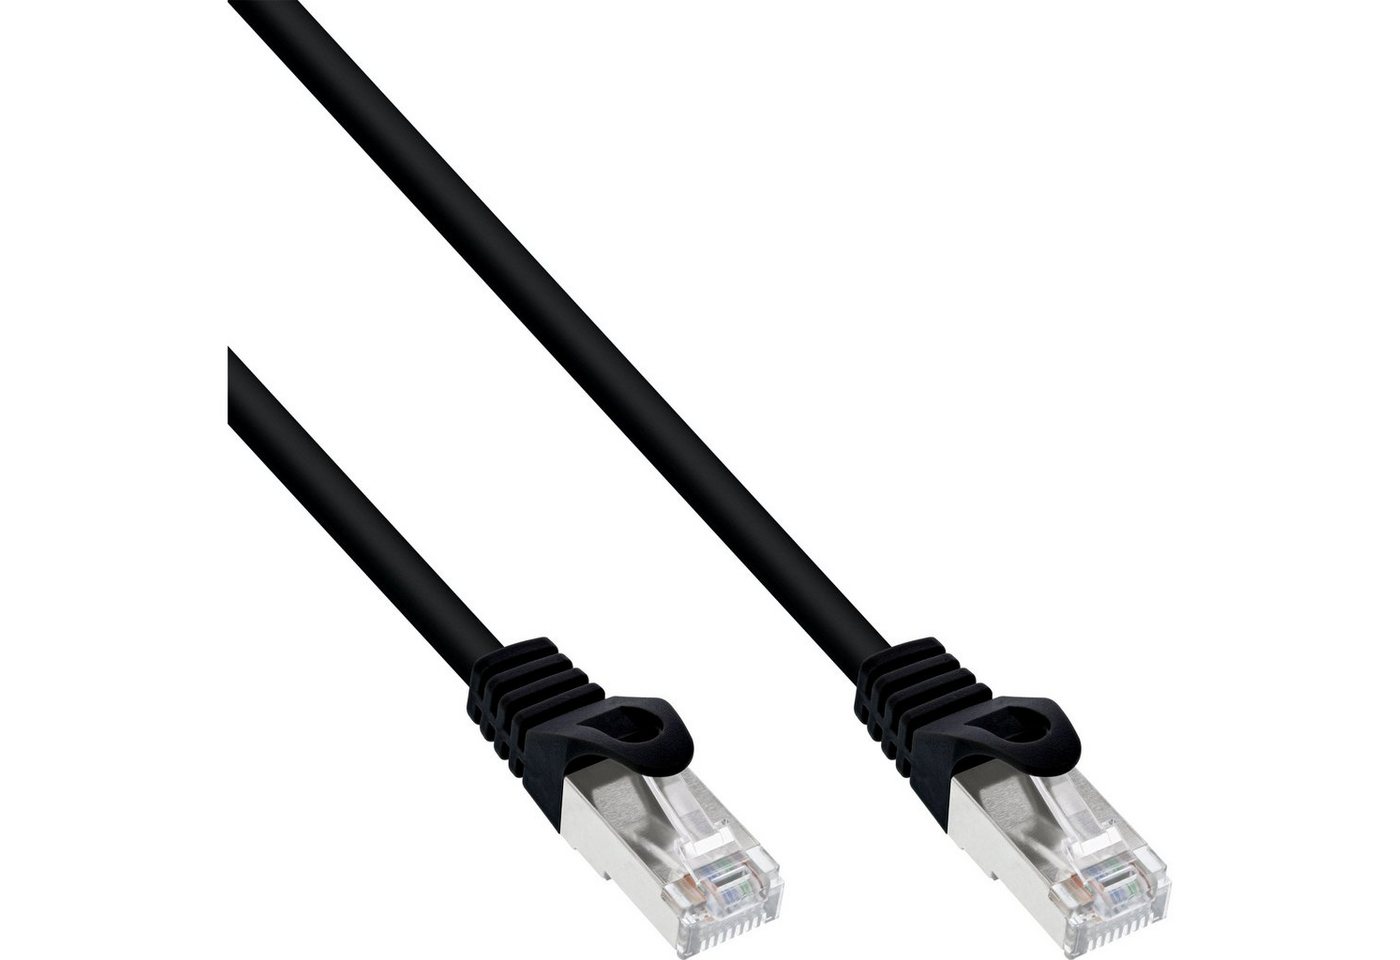 INTOS ELECTRONIC AG InLine® Patchkabel, SF/UTP, Cat.5e, schwarz, 25m LAN-Kabel von INTOS ELECTRONIC AG